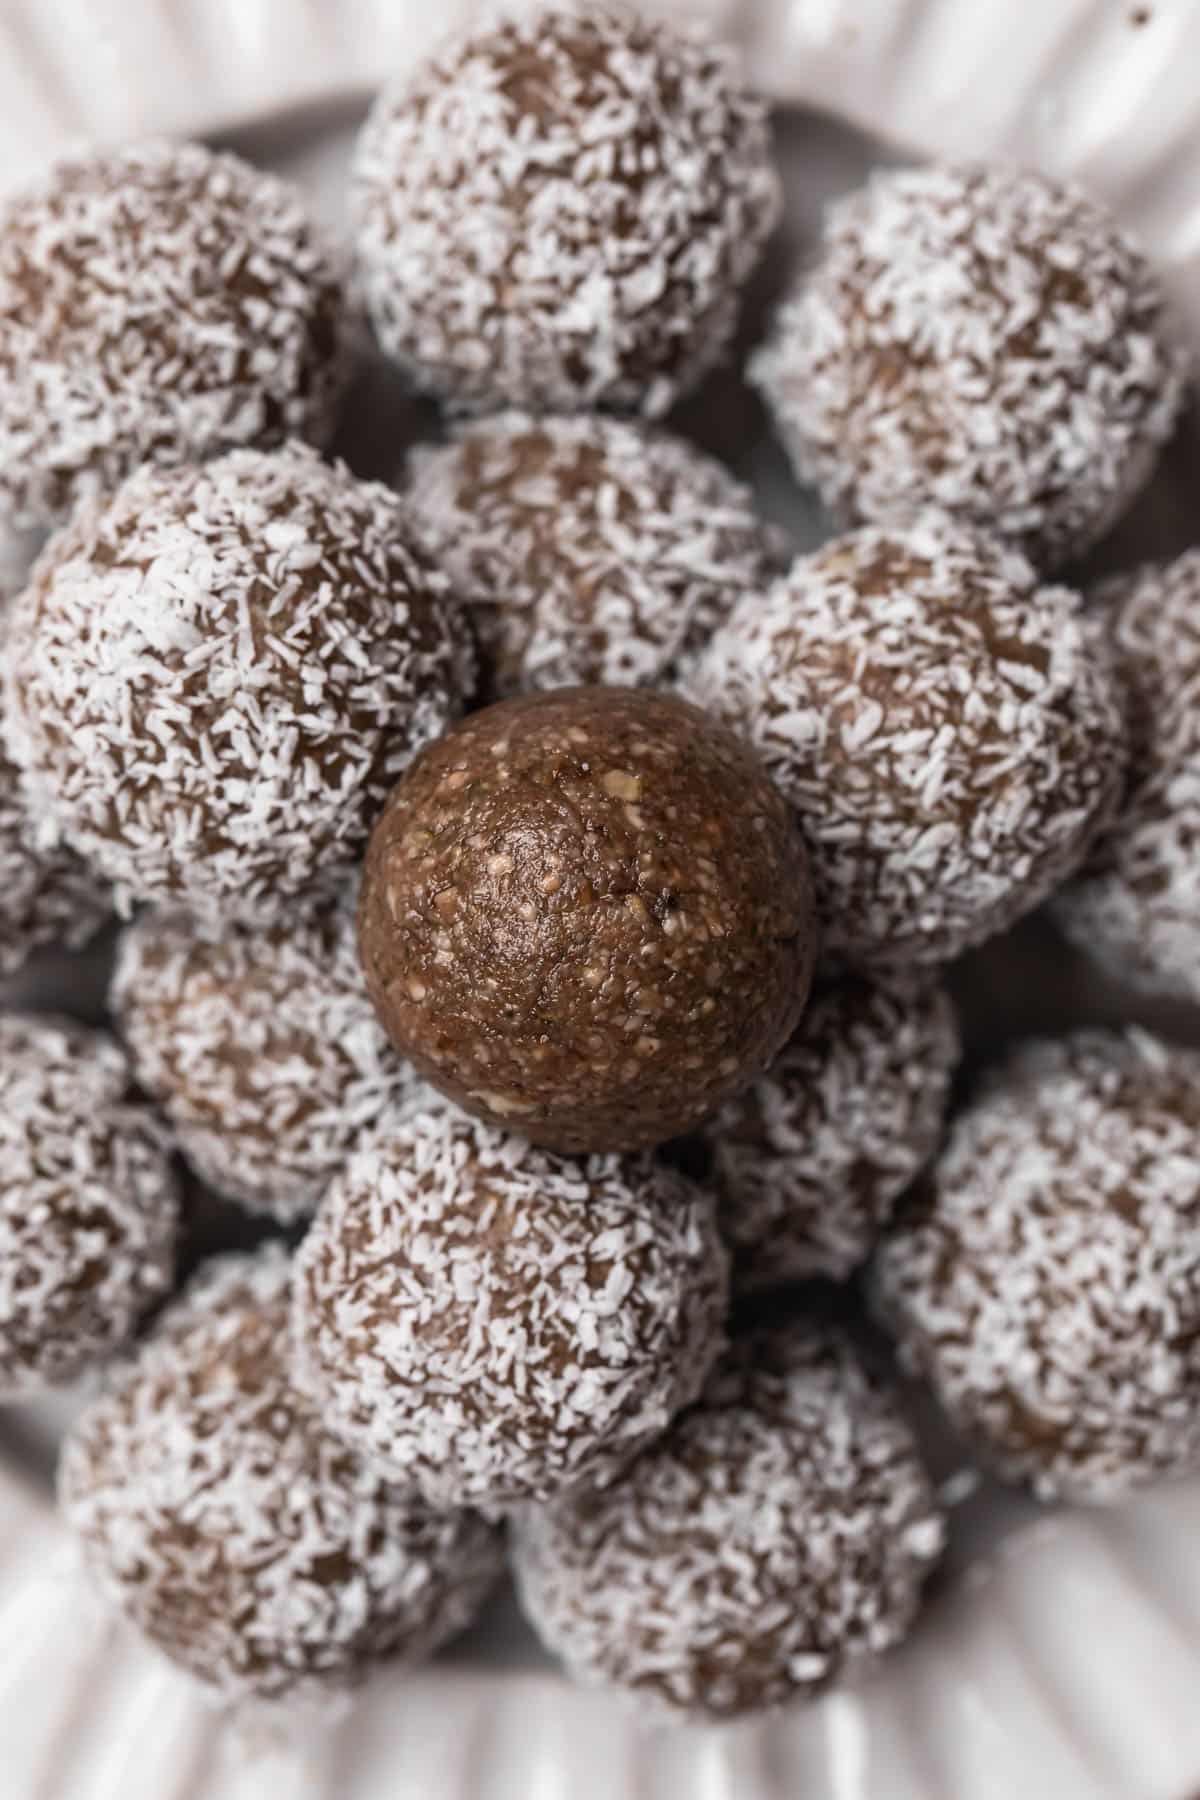 Bliss balls rolled in coconut, stacked on a white ceramic plate. The top bliss ball isn't rolled in coconut.